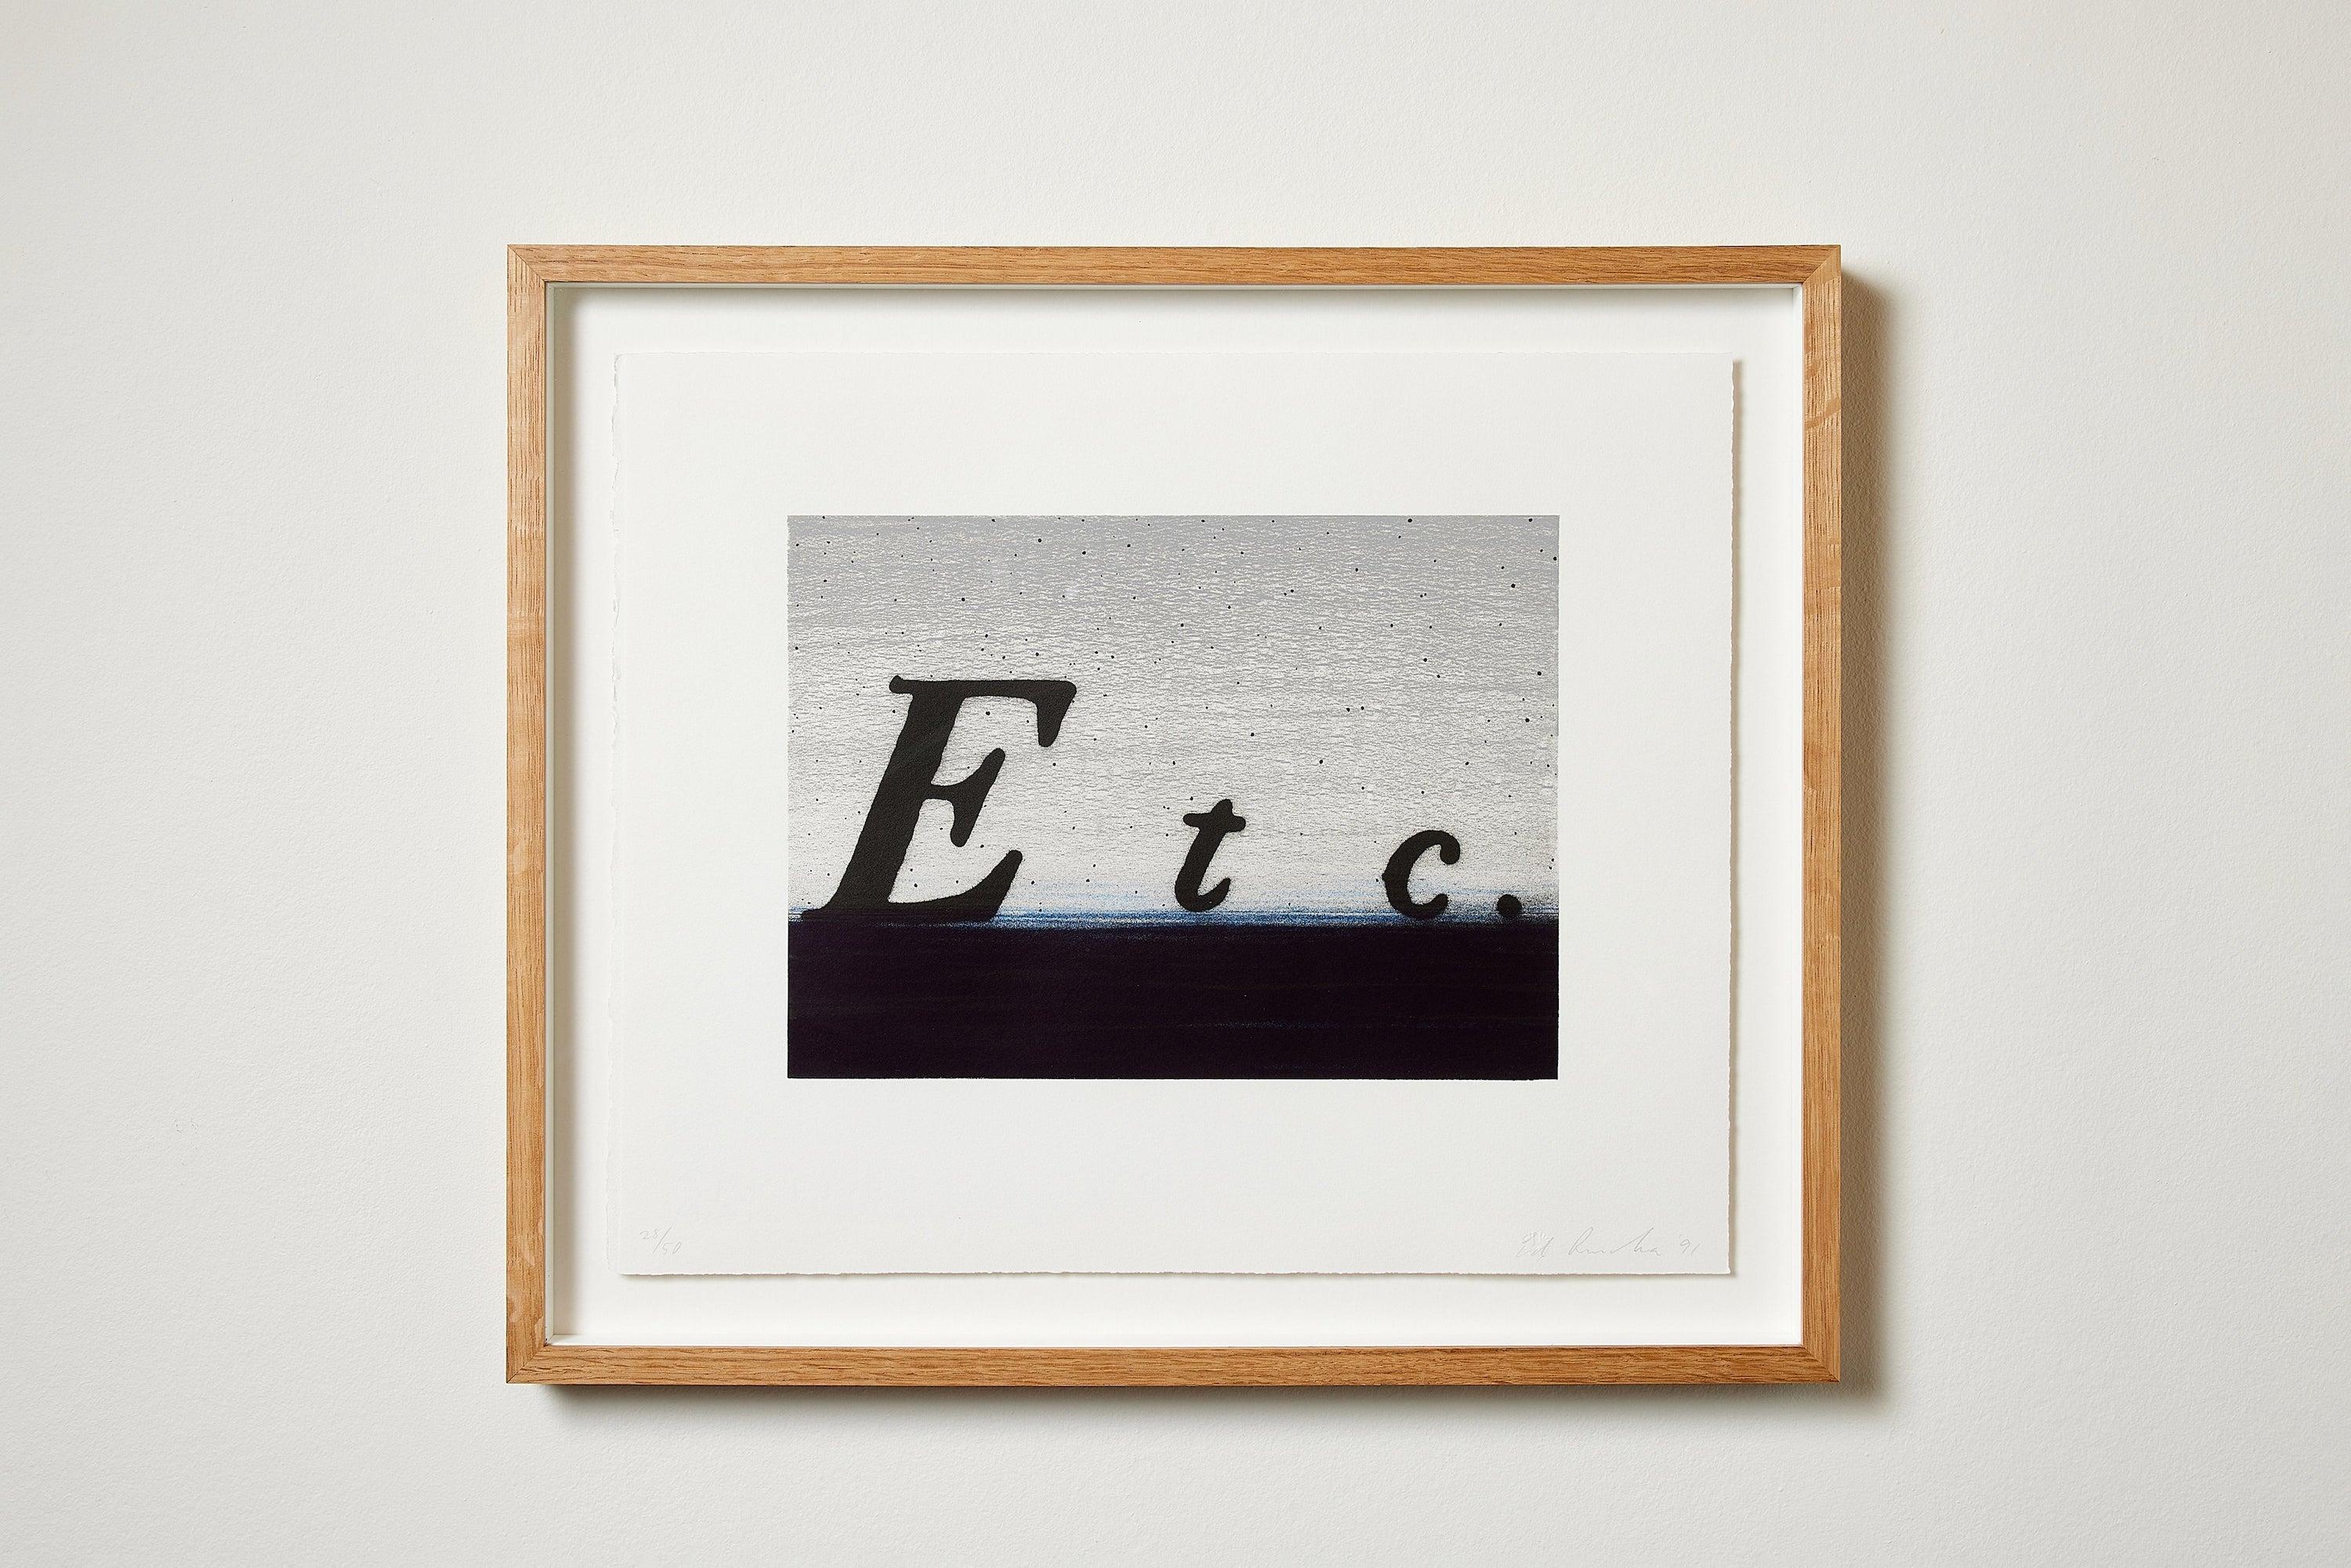 Etc., 1991
Ed Ruscha

Lithograph in colours, on white Rives BFK paper
Signed, dated and numbered from the edition of 50
Printed by Hamilton Press, Venice, California
Published by Creative Works Editions, Osaka, Japan
Sheet: 38.4 × 45.7 cm (15.1 × 18